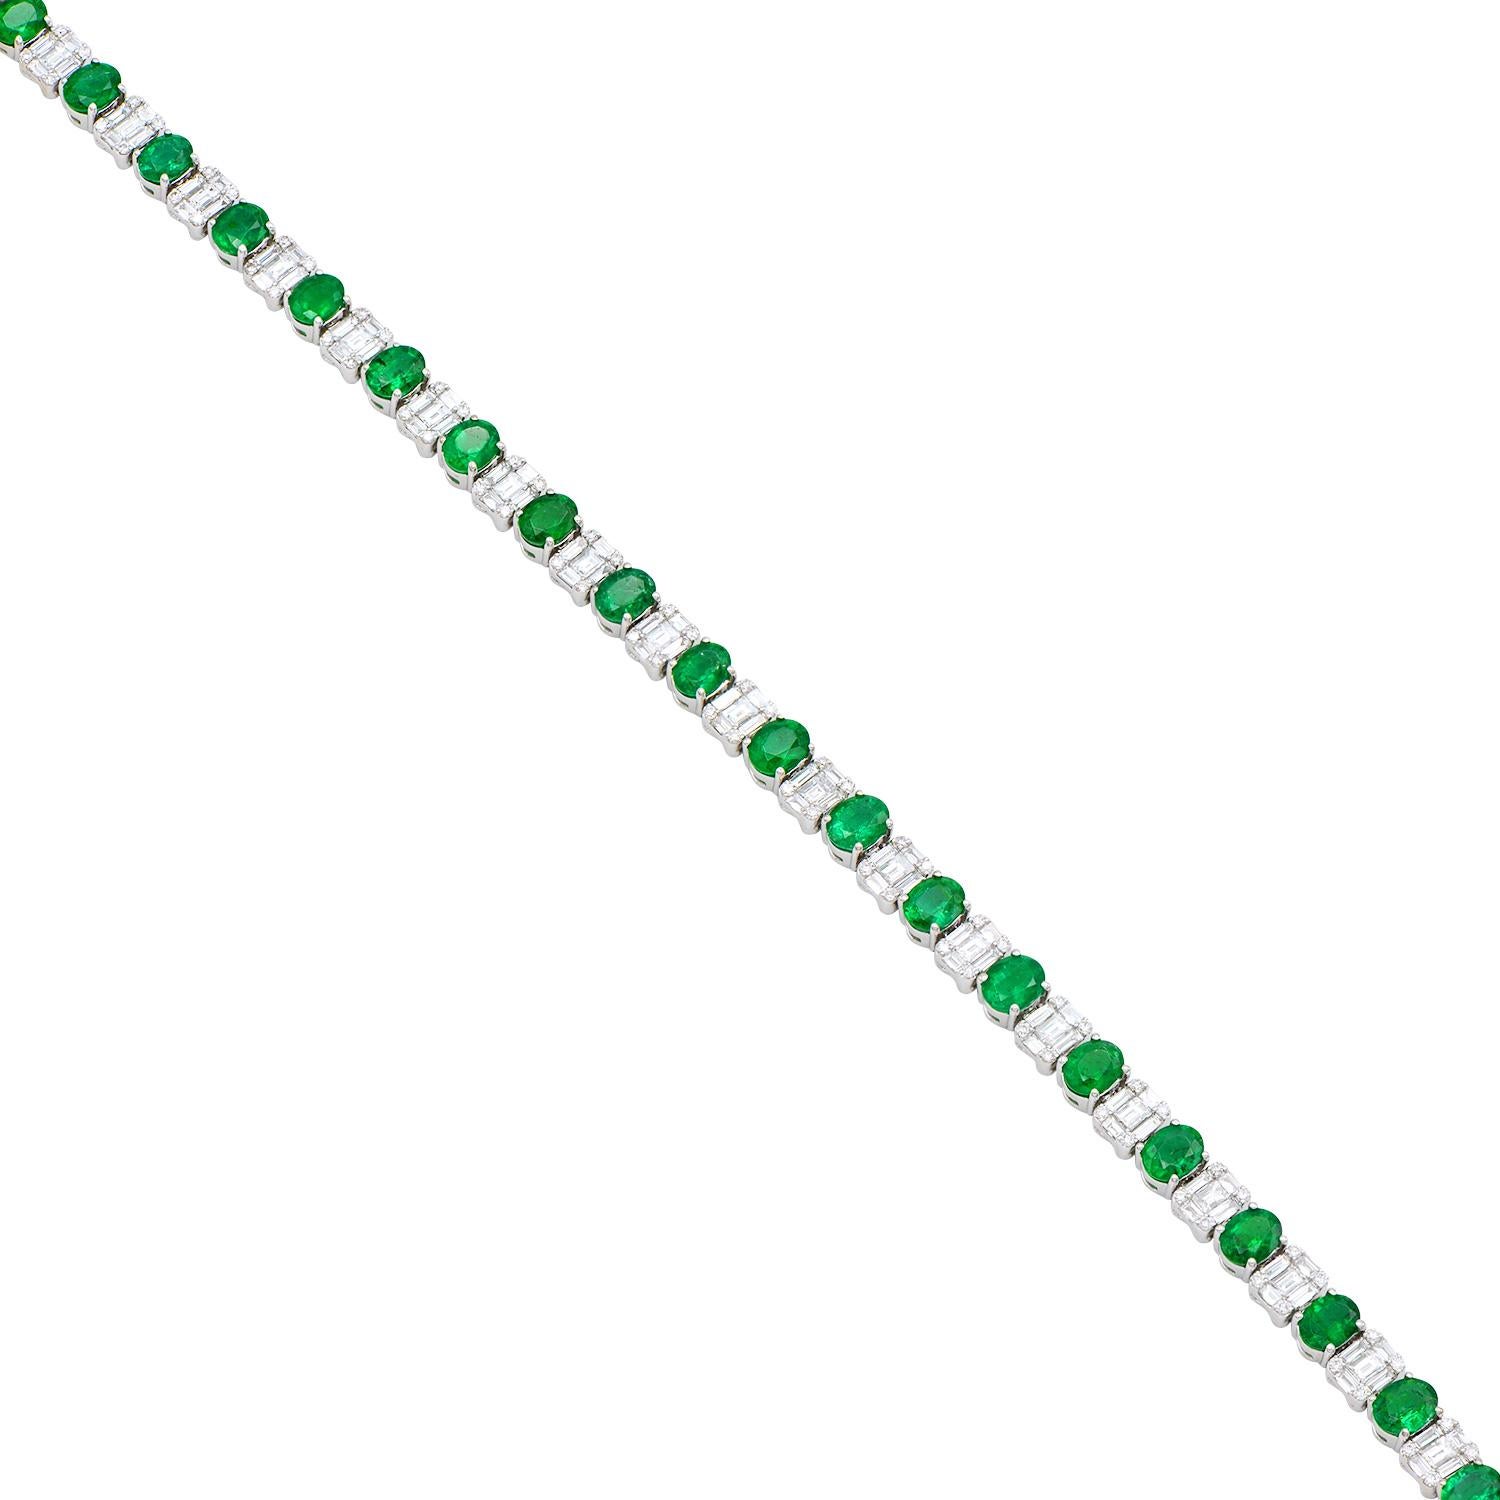 This truly gorgeous emerald and diamond bracelet is made from 21 oval green emeralds totalling 6.5 carats that alternate with diamonds set to look like emerald-cut diamonds. The diamonds are made from 105 baguettes and 84 round diamonds which total